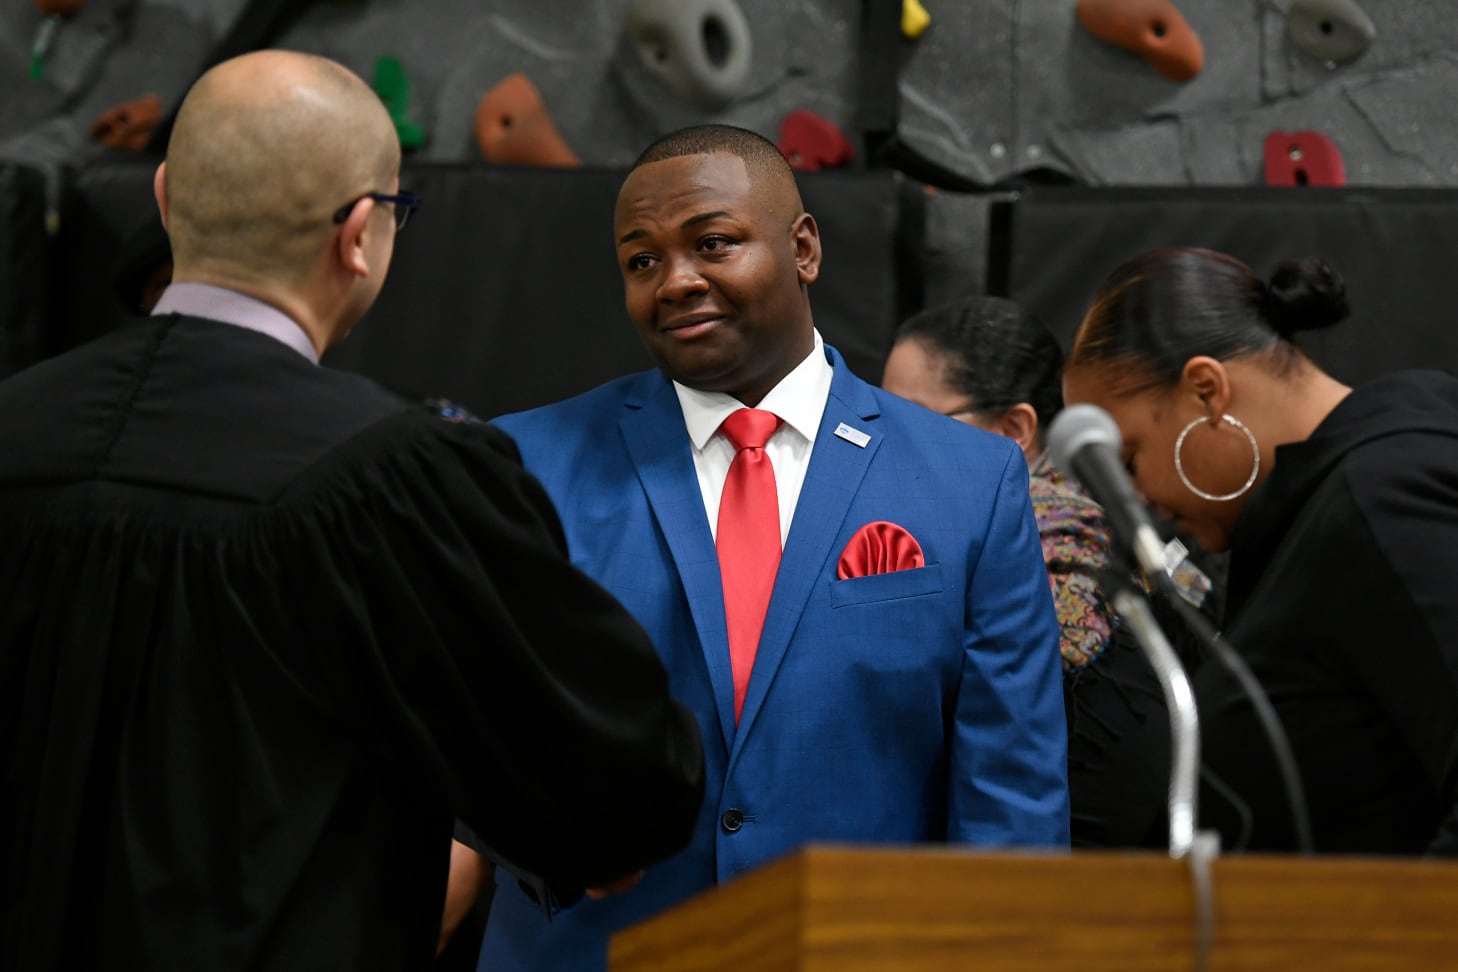 Auon’tai Anderson, wearing a blue suit with a red tie, shakes hands with a judge behind a podium after being sworn in.